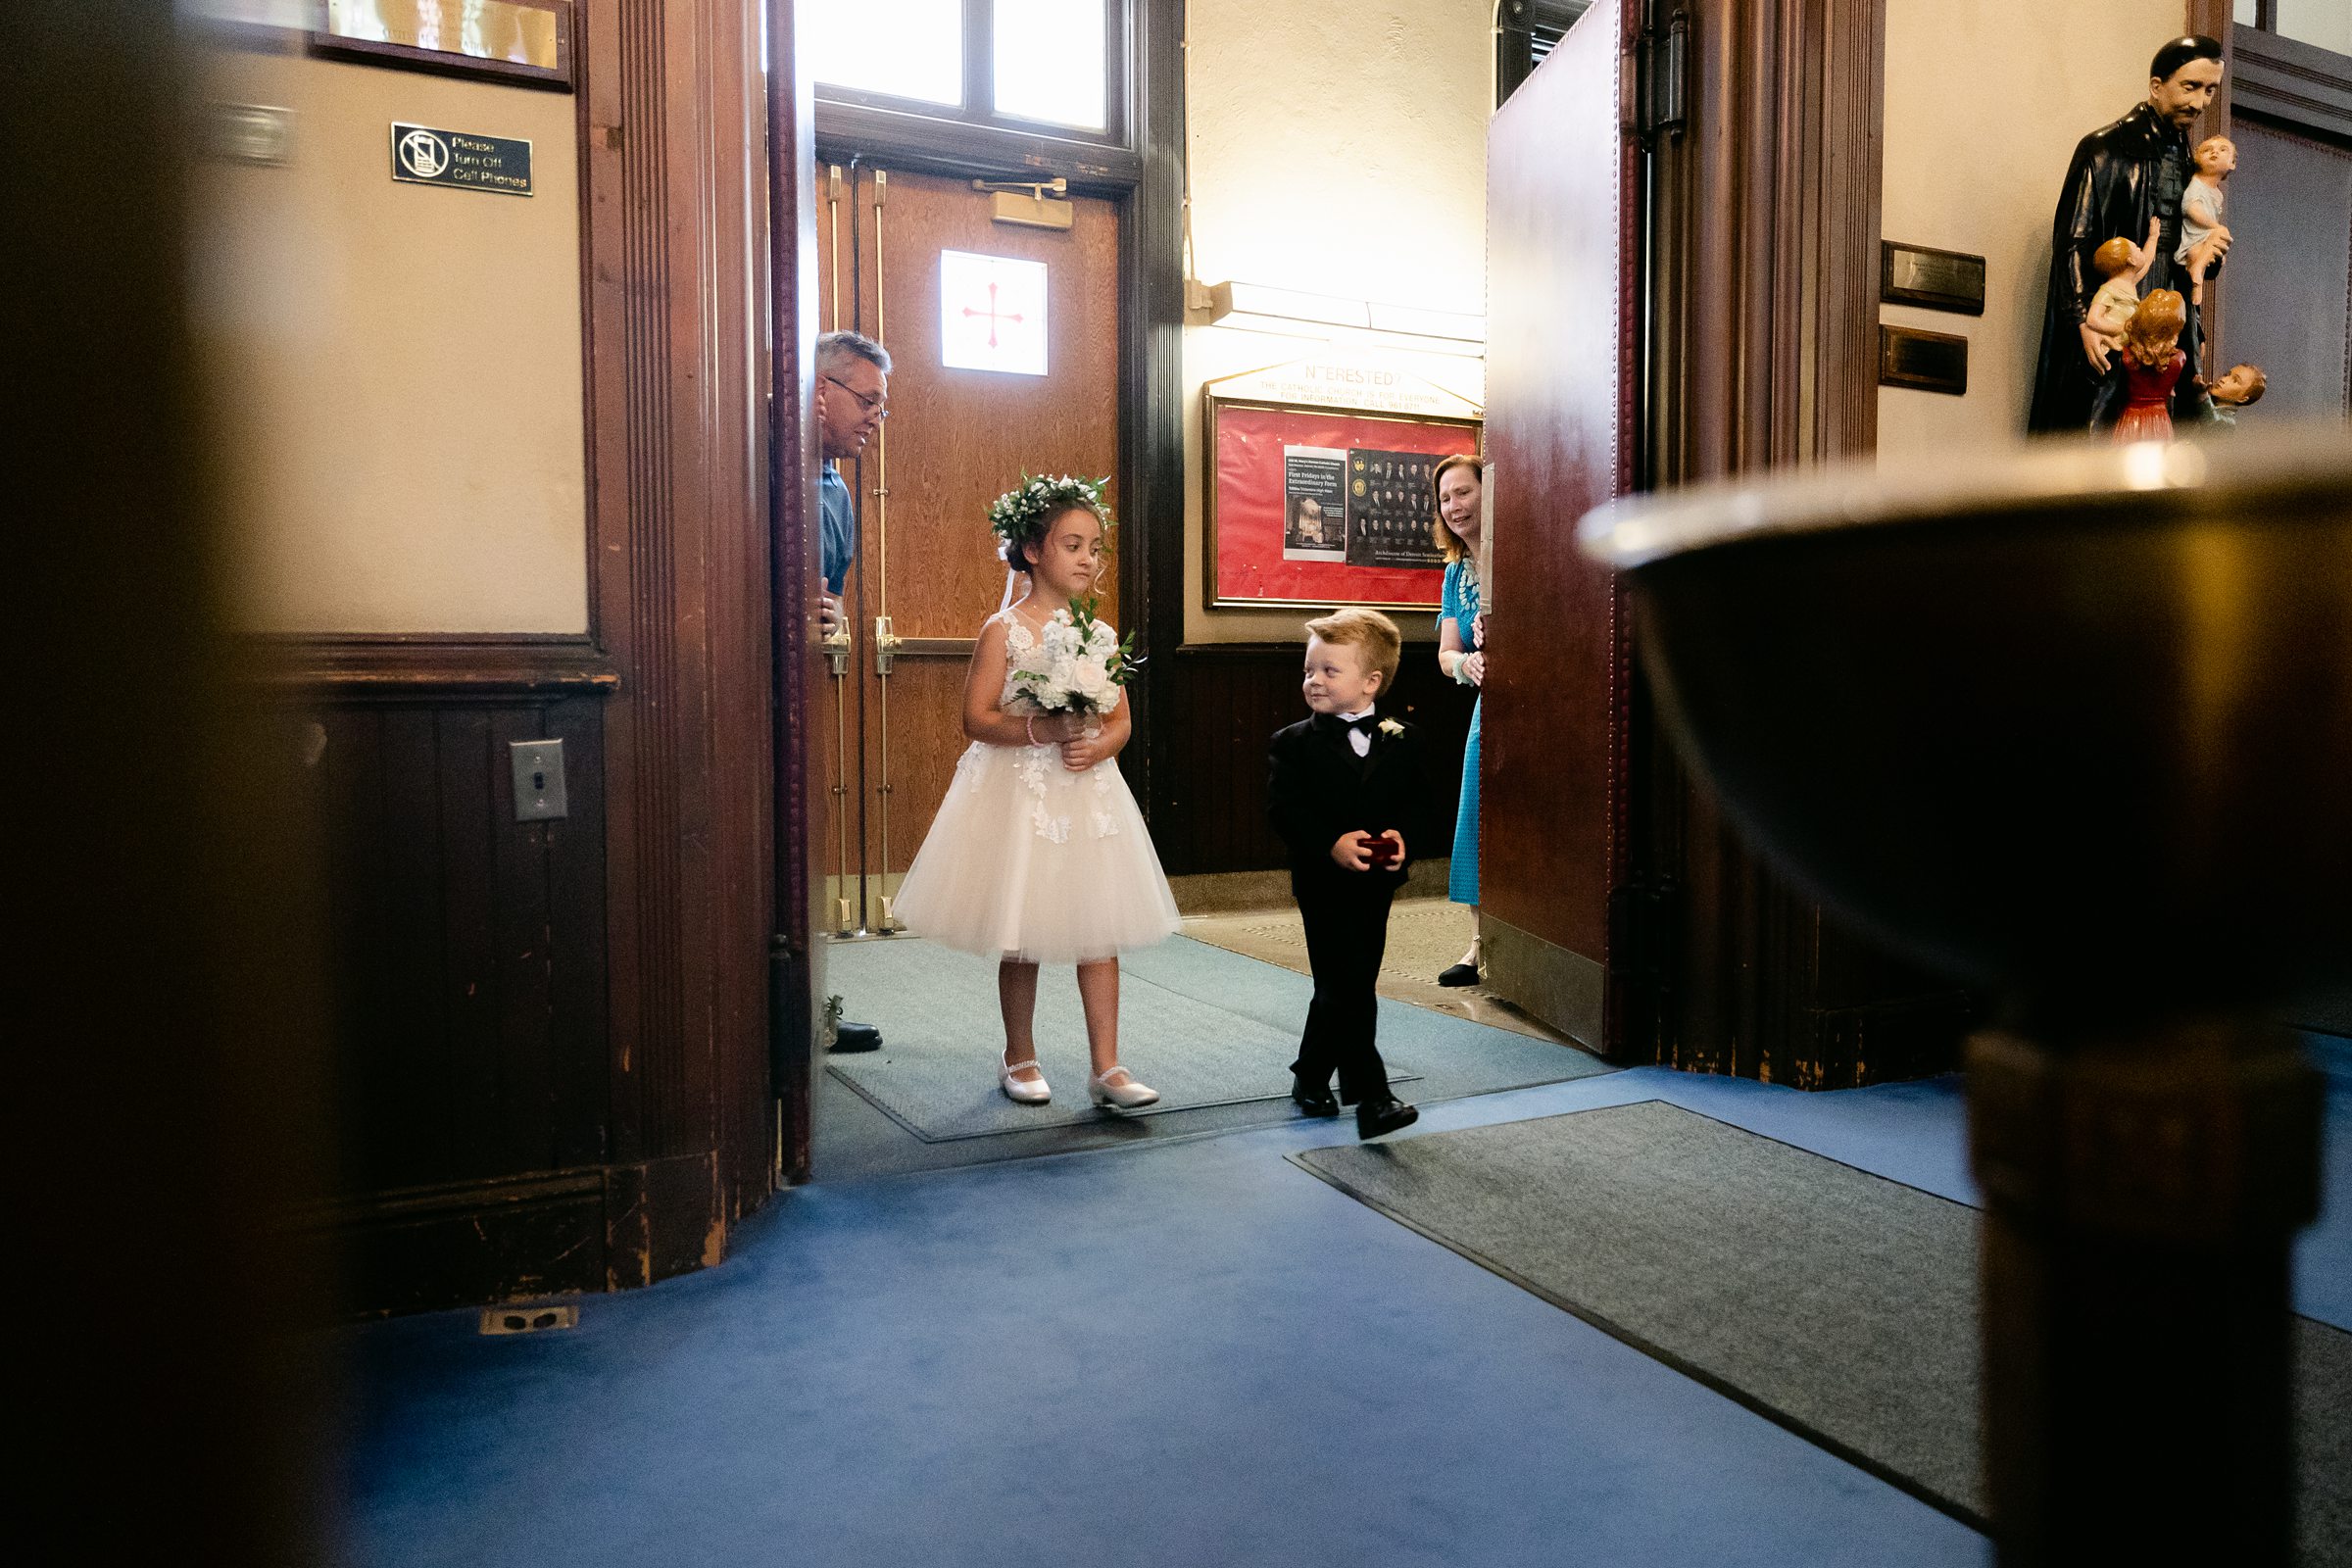 Children walking down the aisle at cathedral wedding ceremony